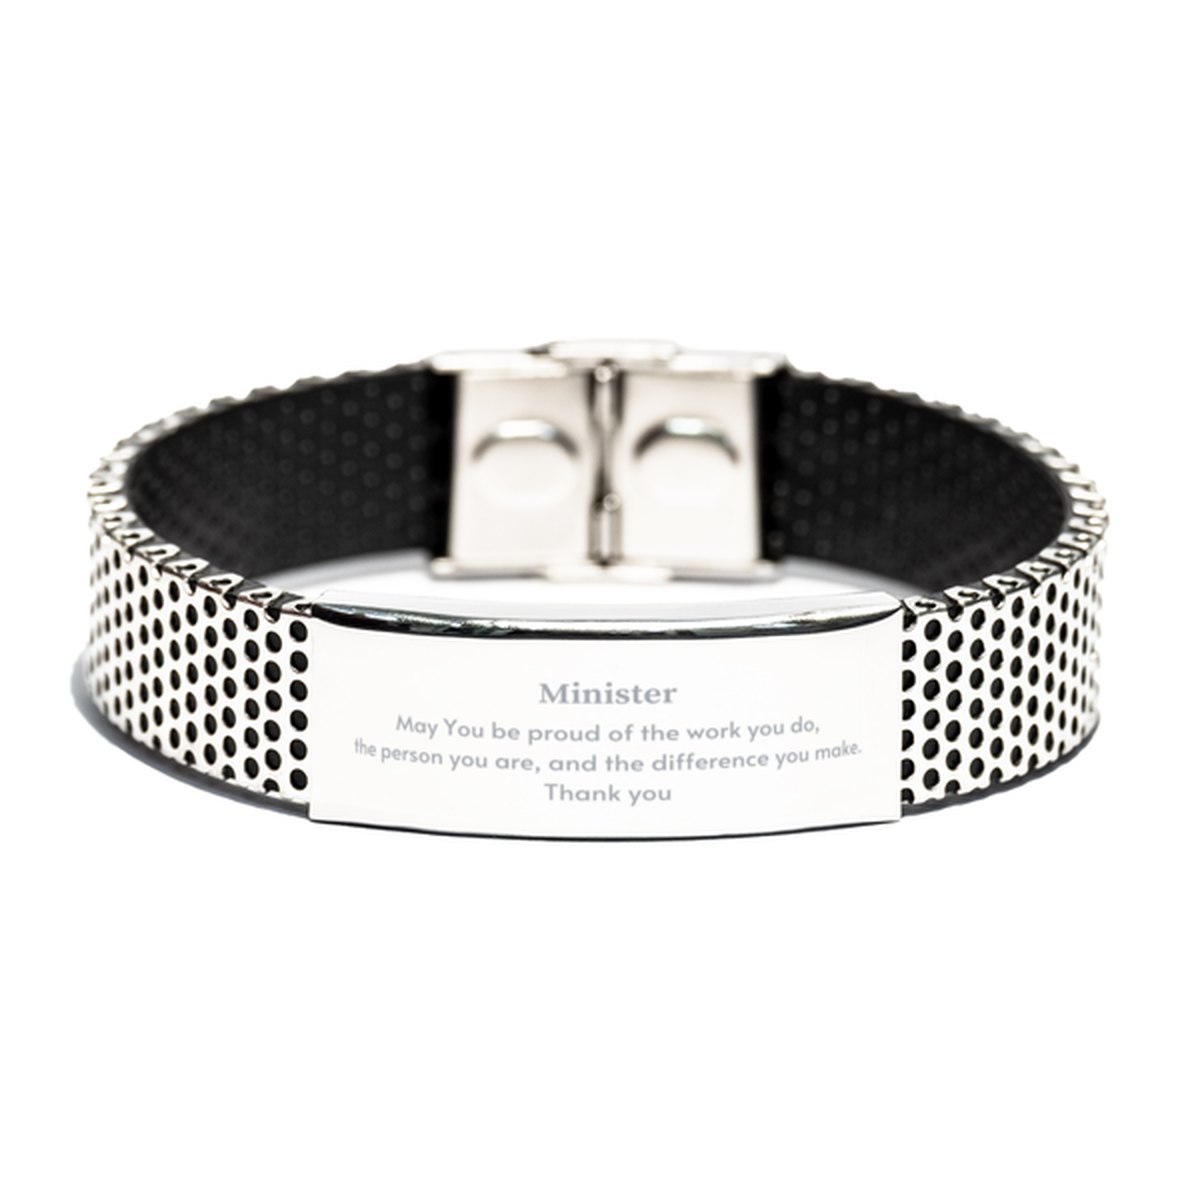 Heartwarming Stainless Steel Bracelet Retirement Coworkers Gifts for Minister, Minister May You be proud of the work you do, the person you are Gifts for Boss Men Women Friends